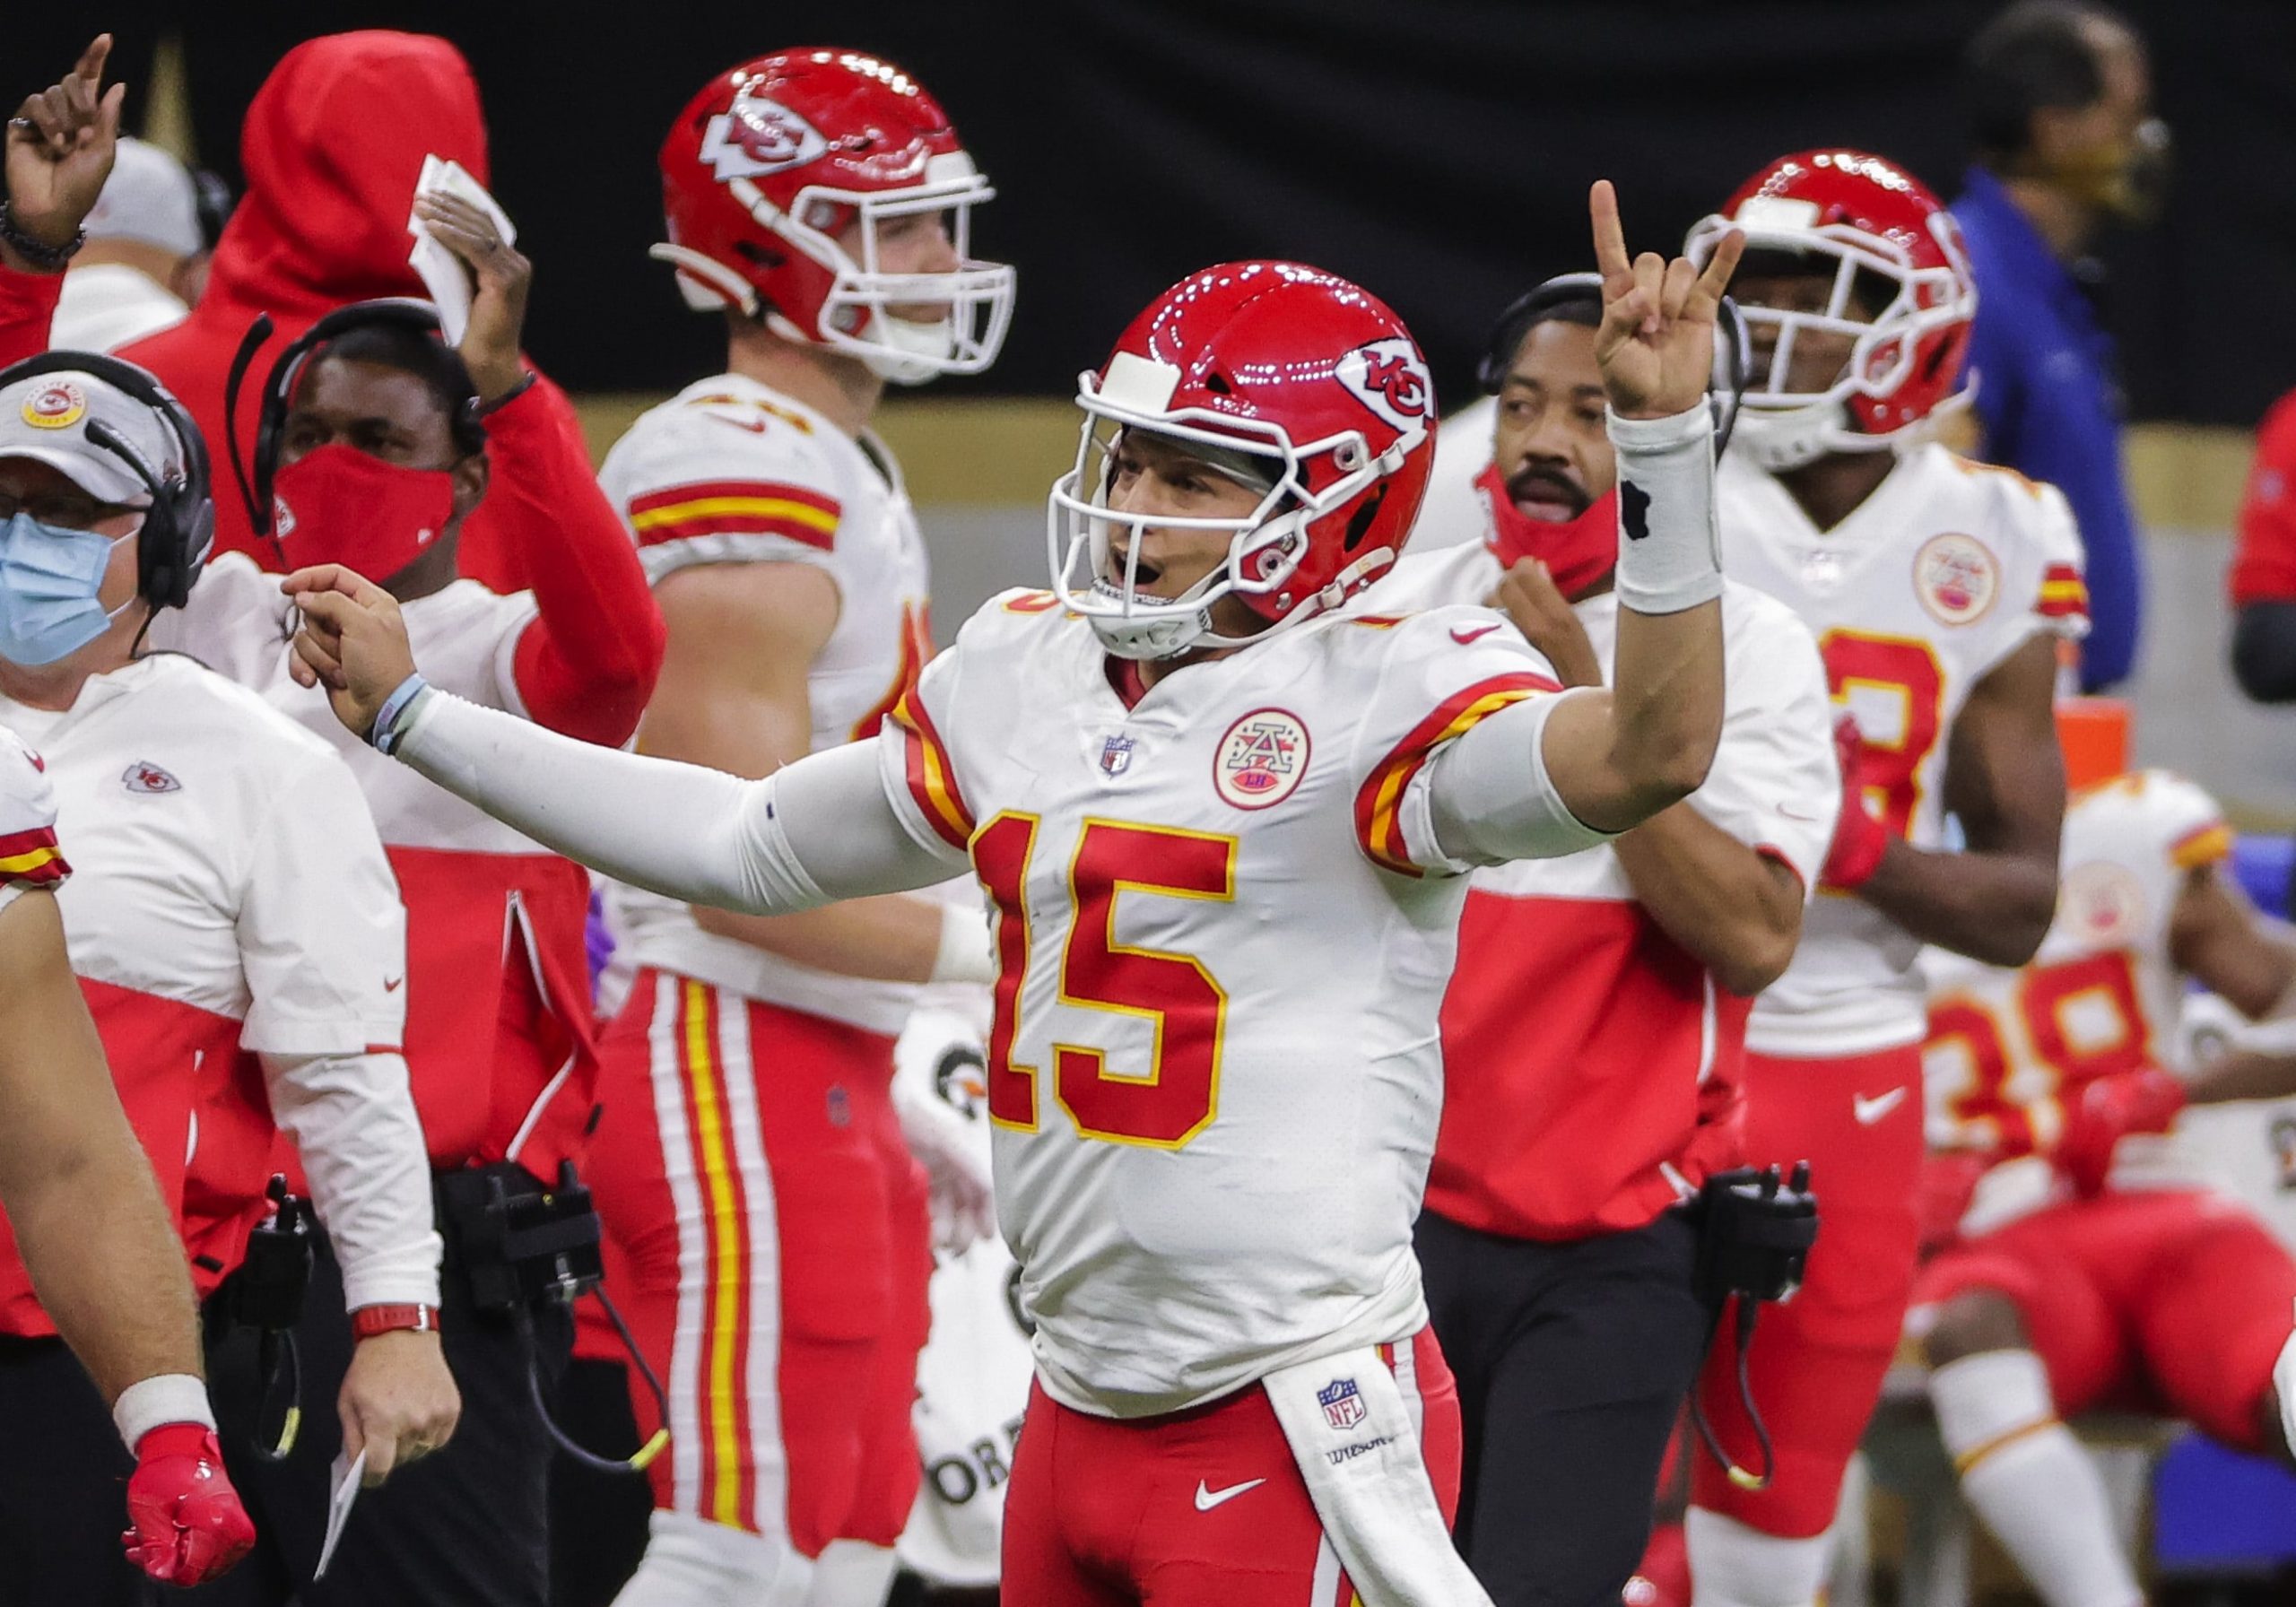 Kansas City Chiefs quarterback Patrick Mahomes (15) celebrates after a score against the New Orleans Saints during the second half at the Mercedes-Benz Superdome.